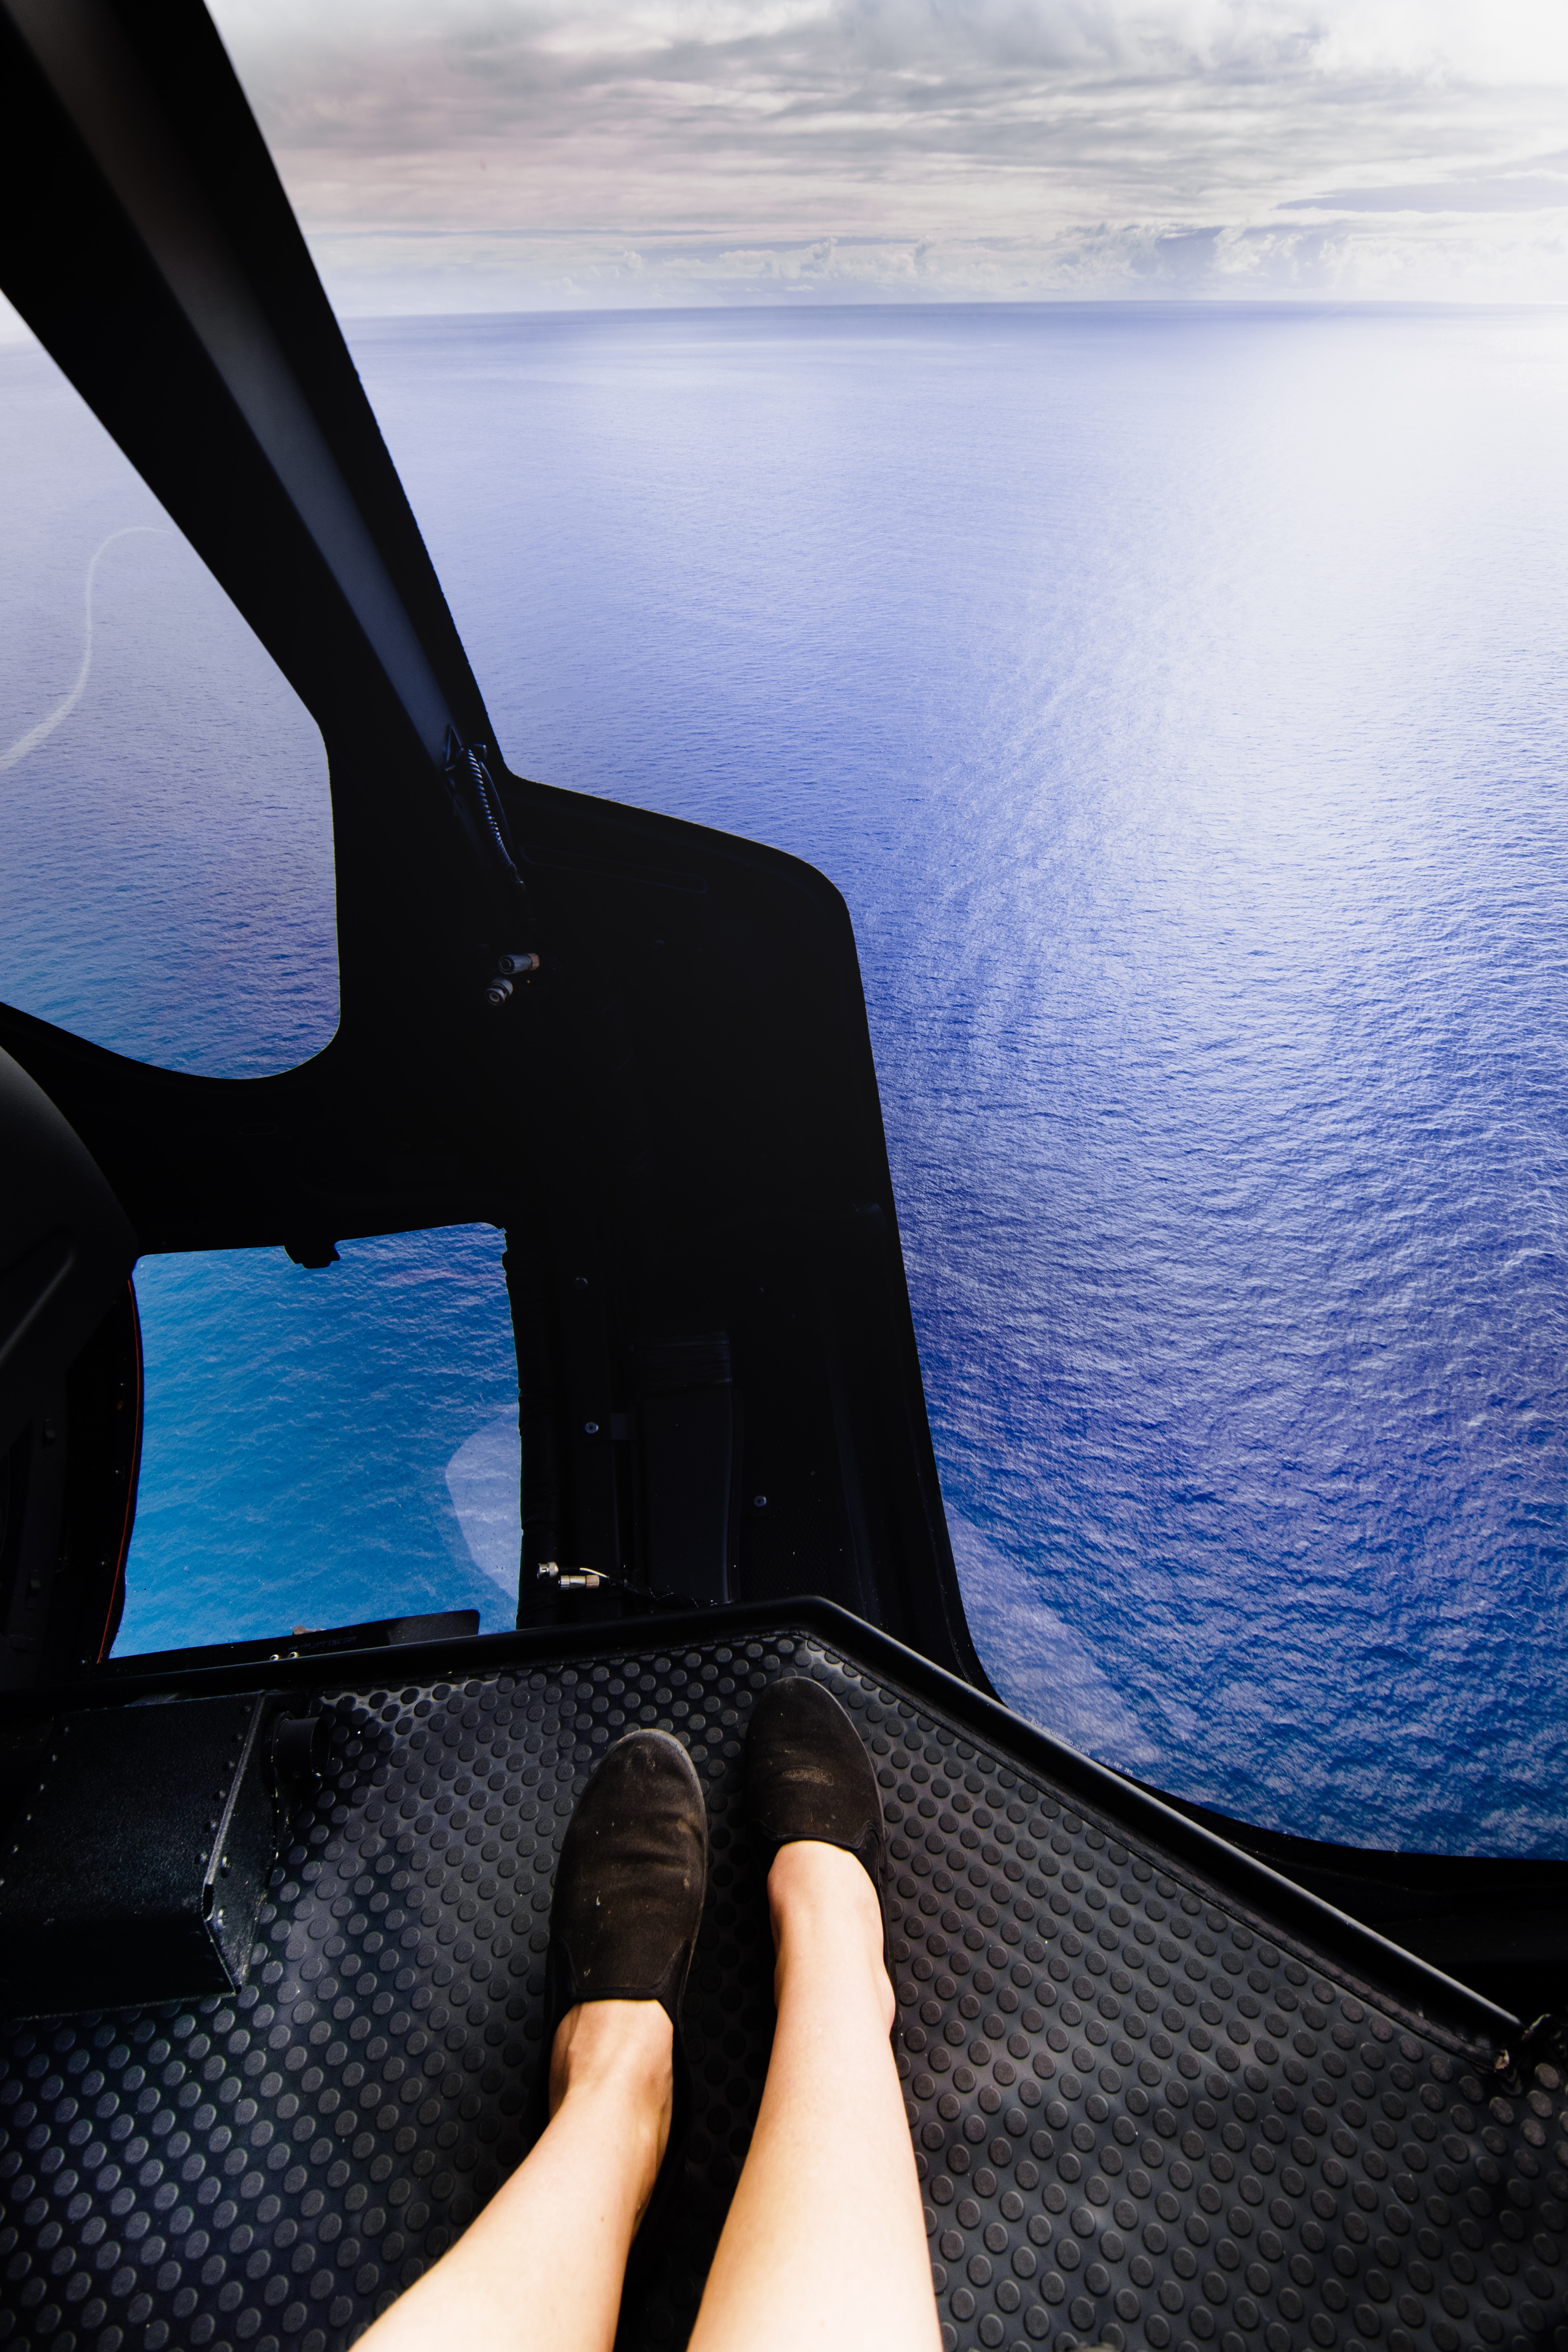 Feet in helicopter above the ocean